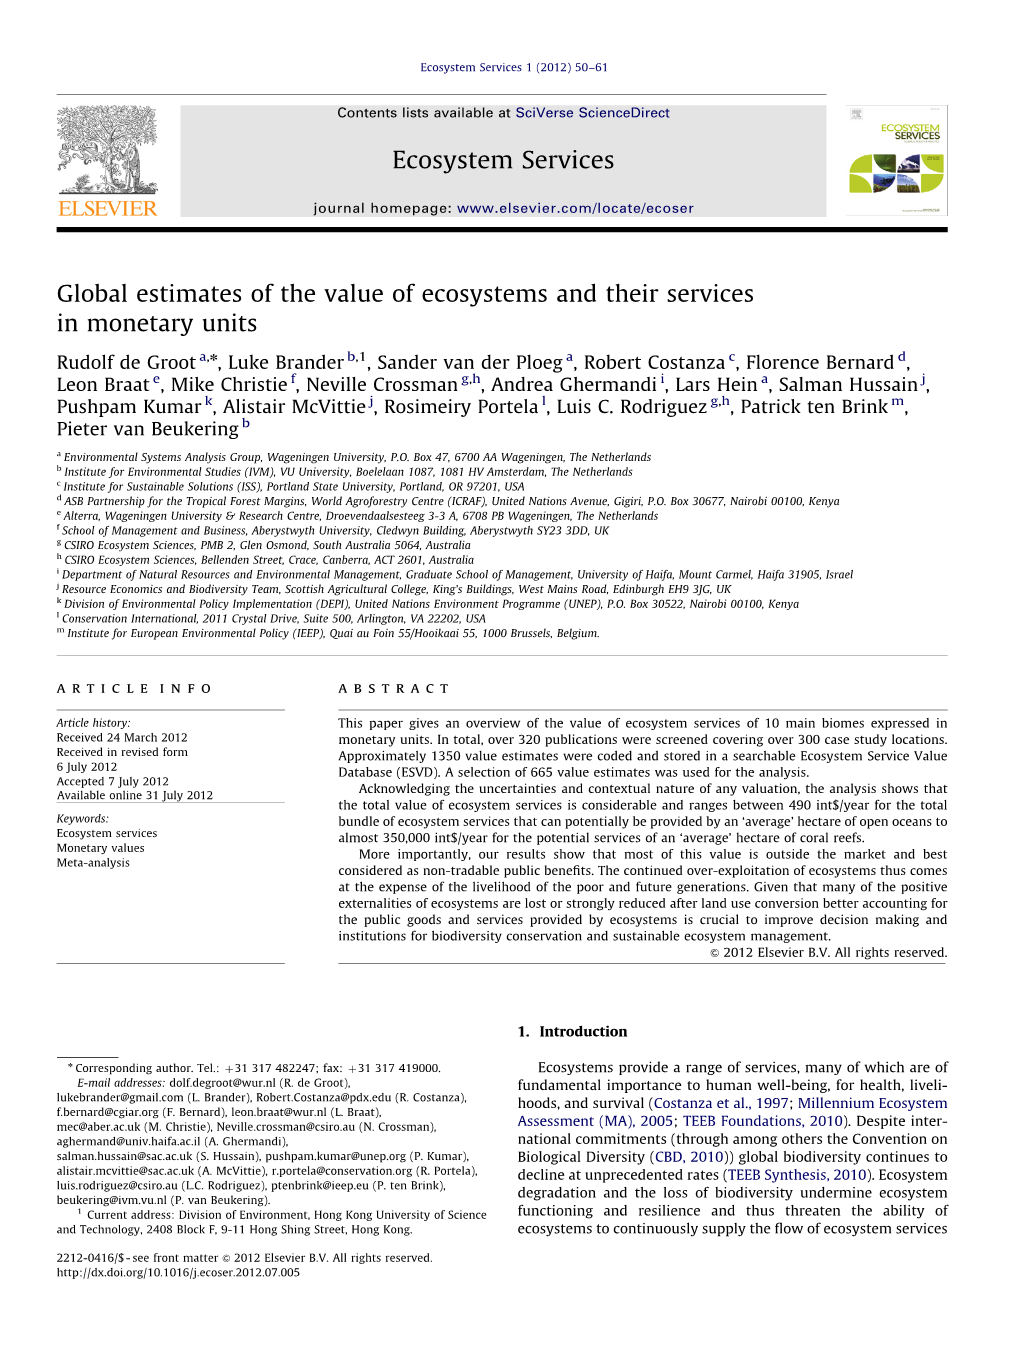 Global Estimates of the Value of Ecosystems and Their Services in Monetary Units